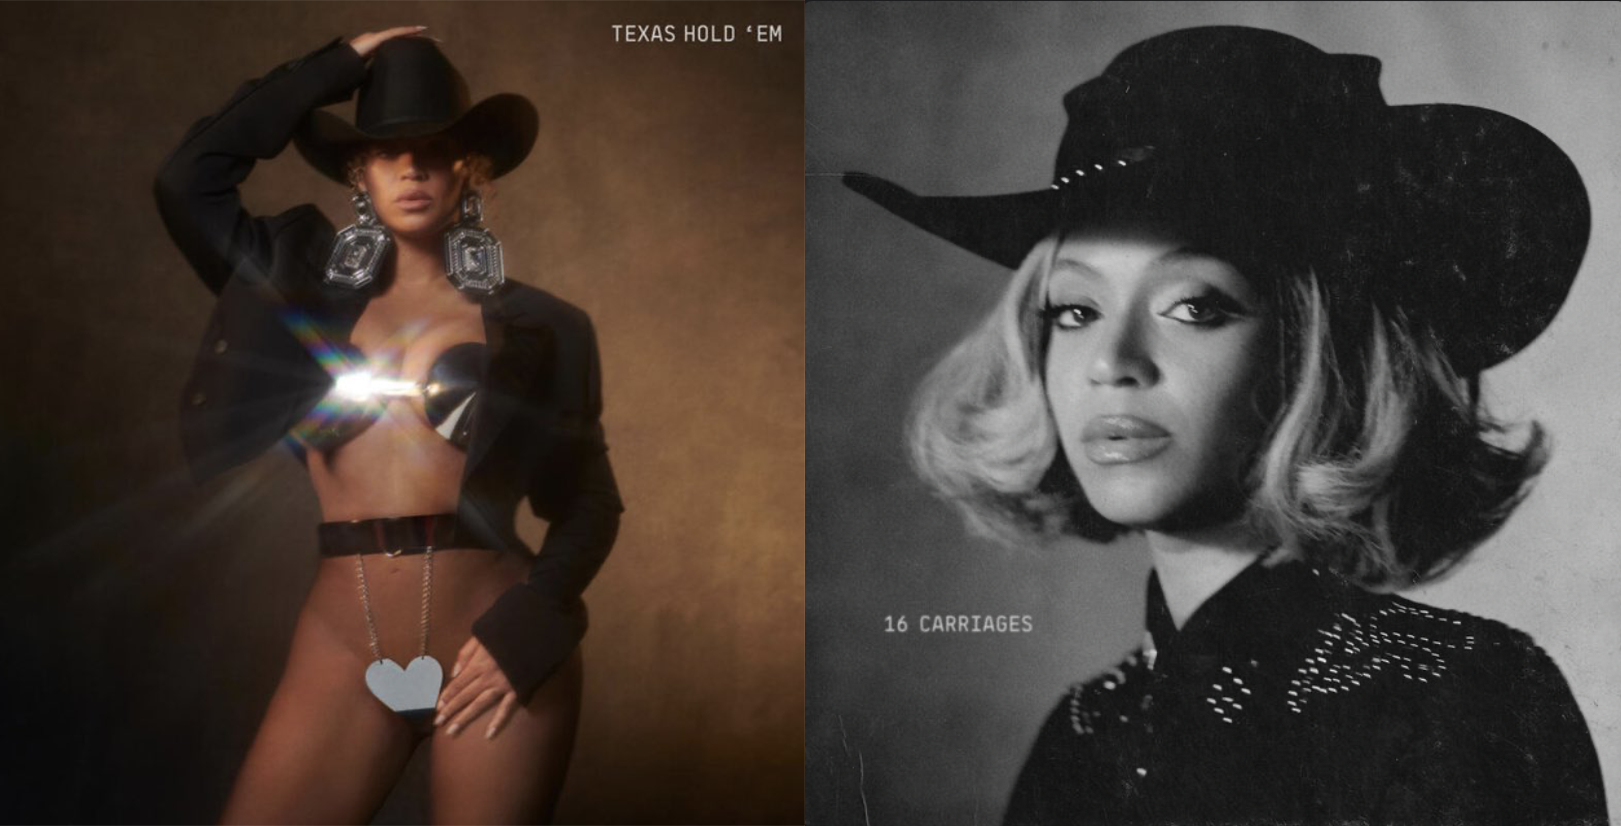 Beyoncé Drops New Songs “16 Carriages” and “Texas Hold ‘Em” — Listen Now